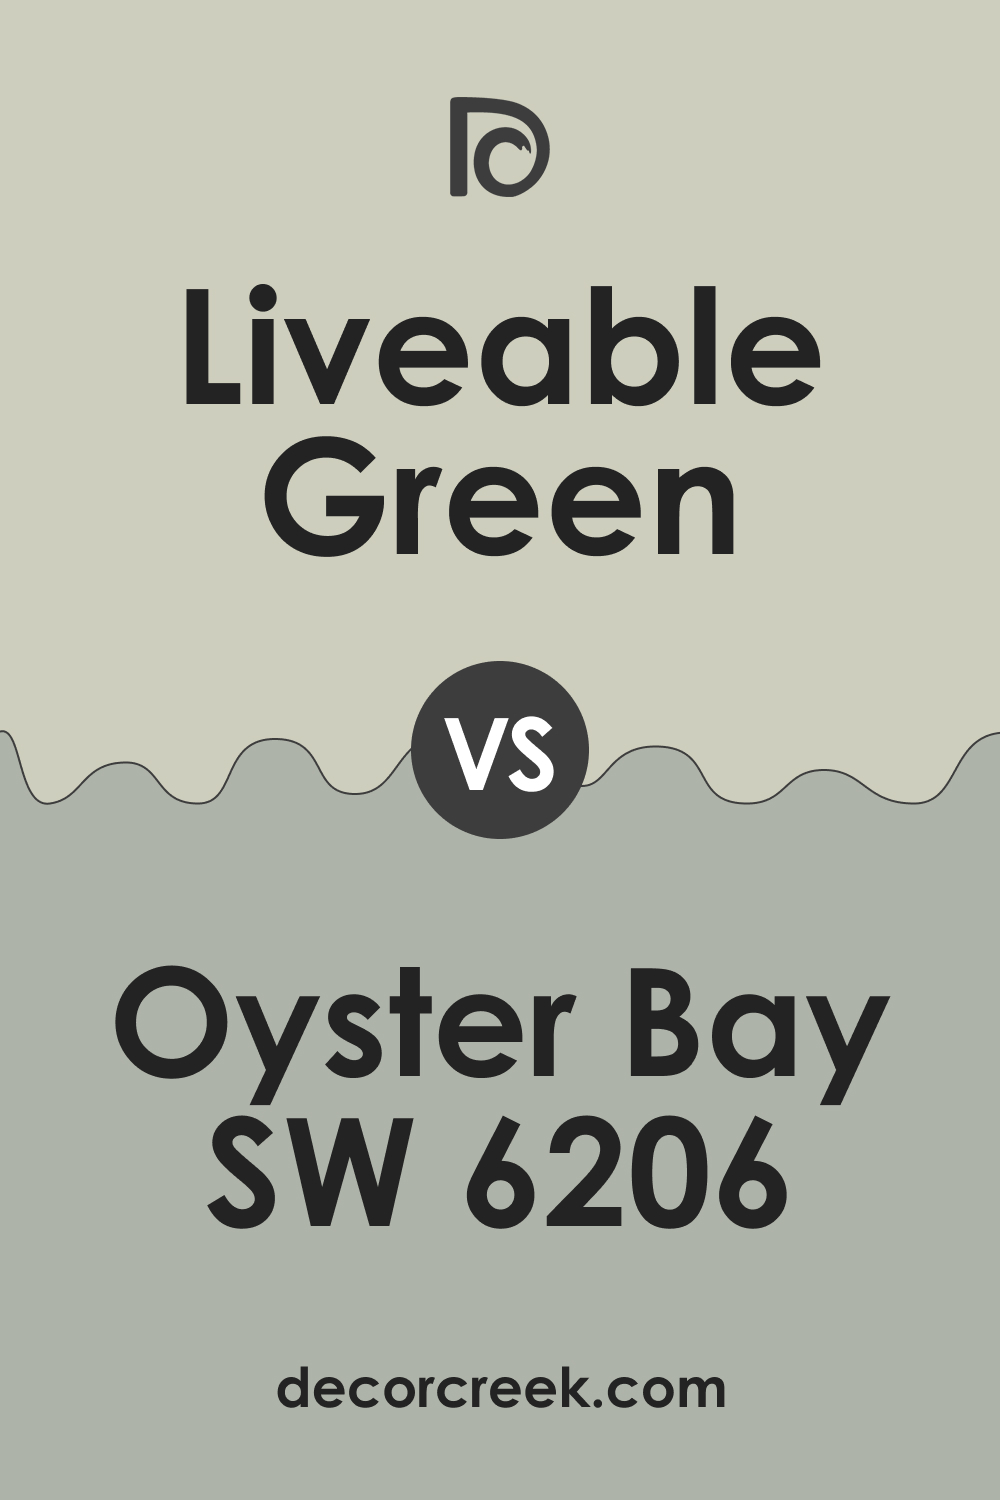 Liveable Green vs Oyster Bay